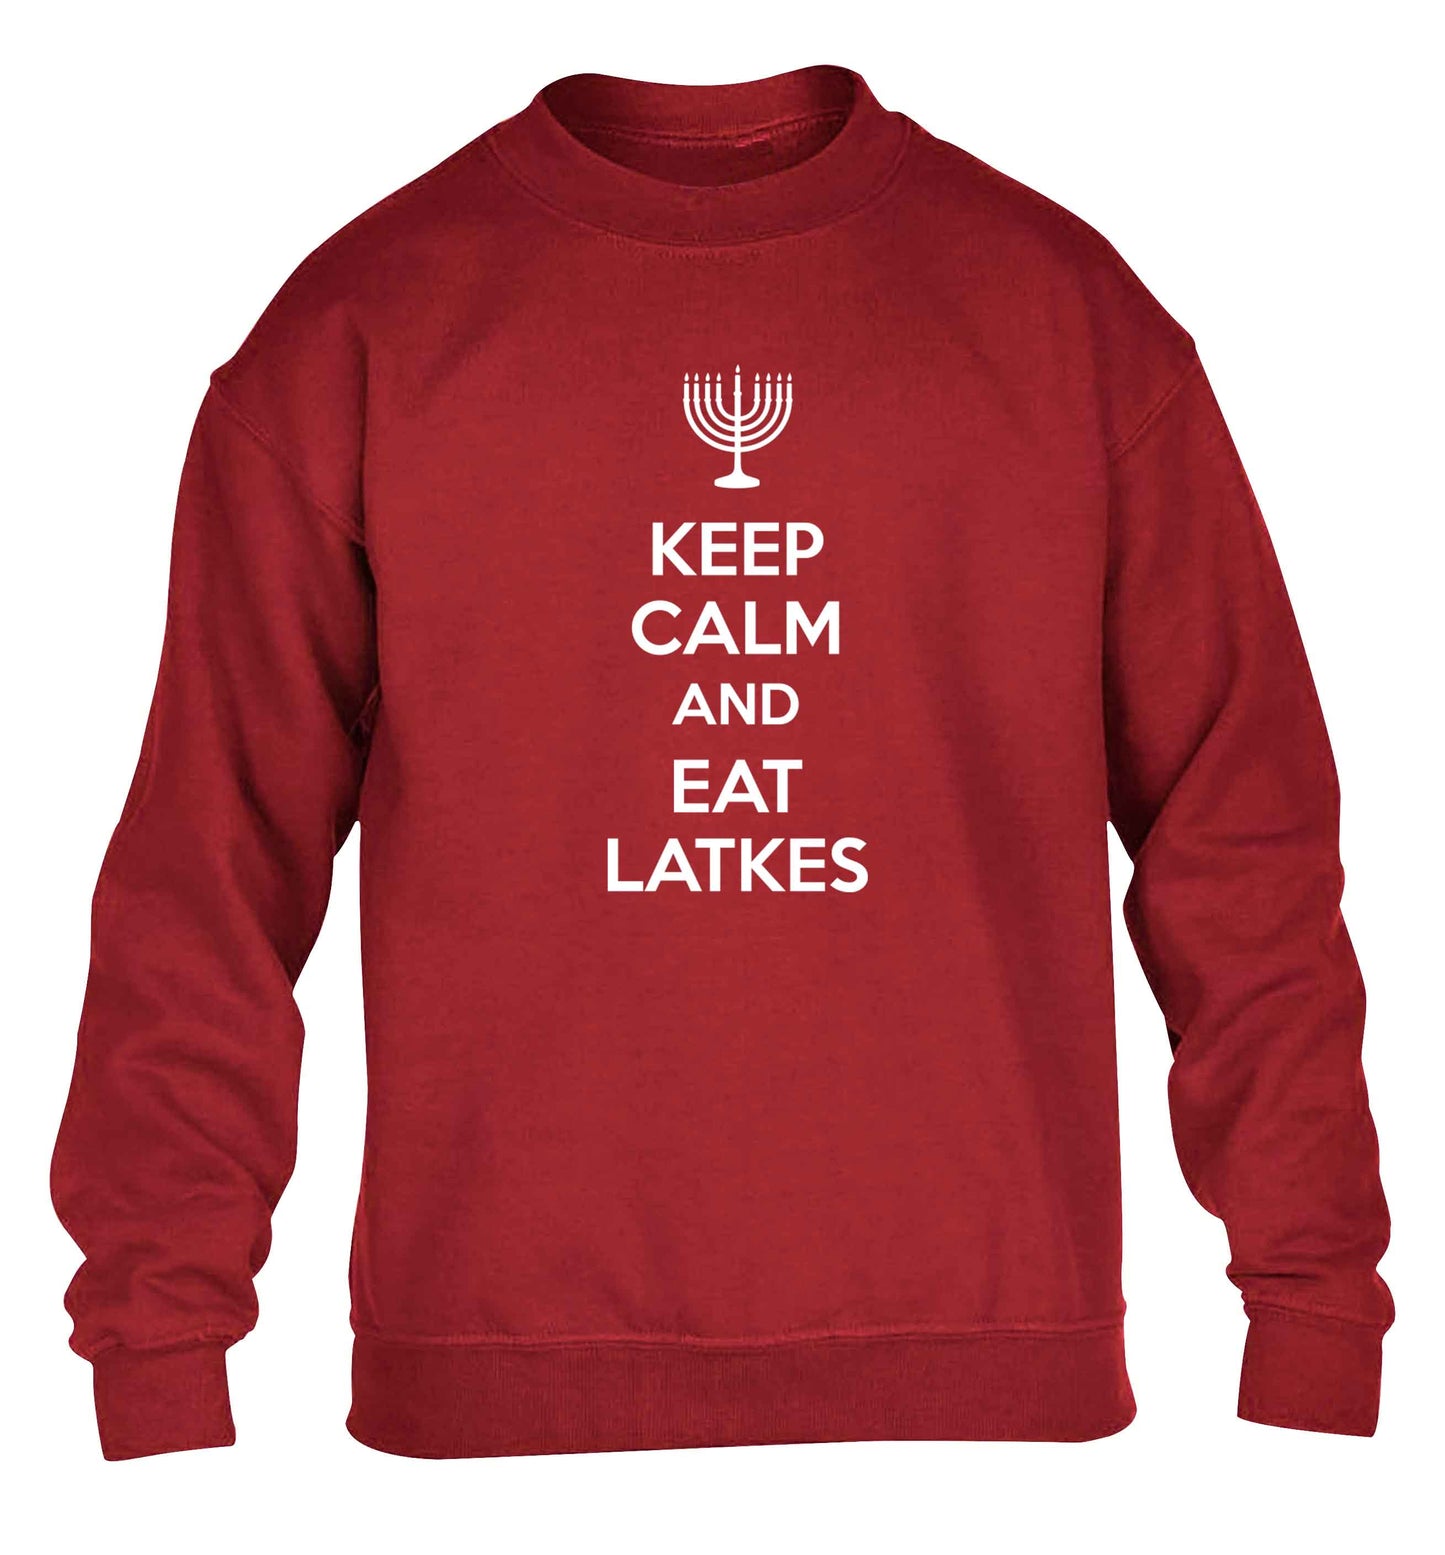 Keep calm and eat latkes children's grey sweater 12-13 Years